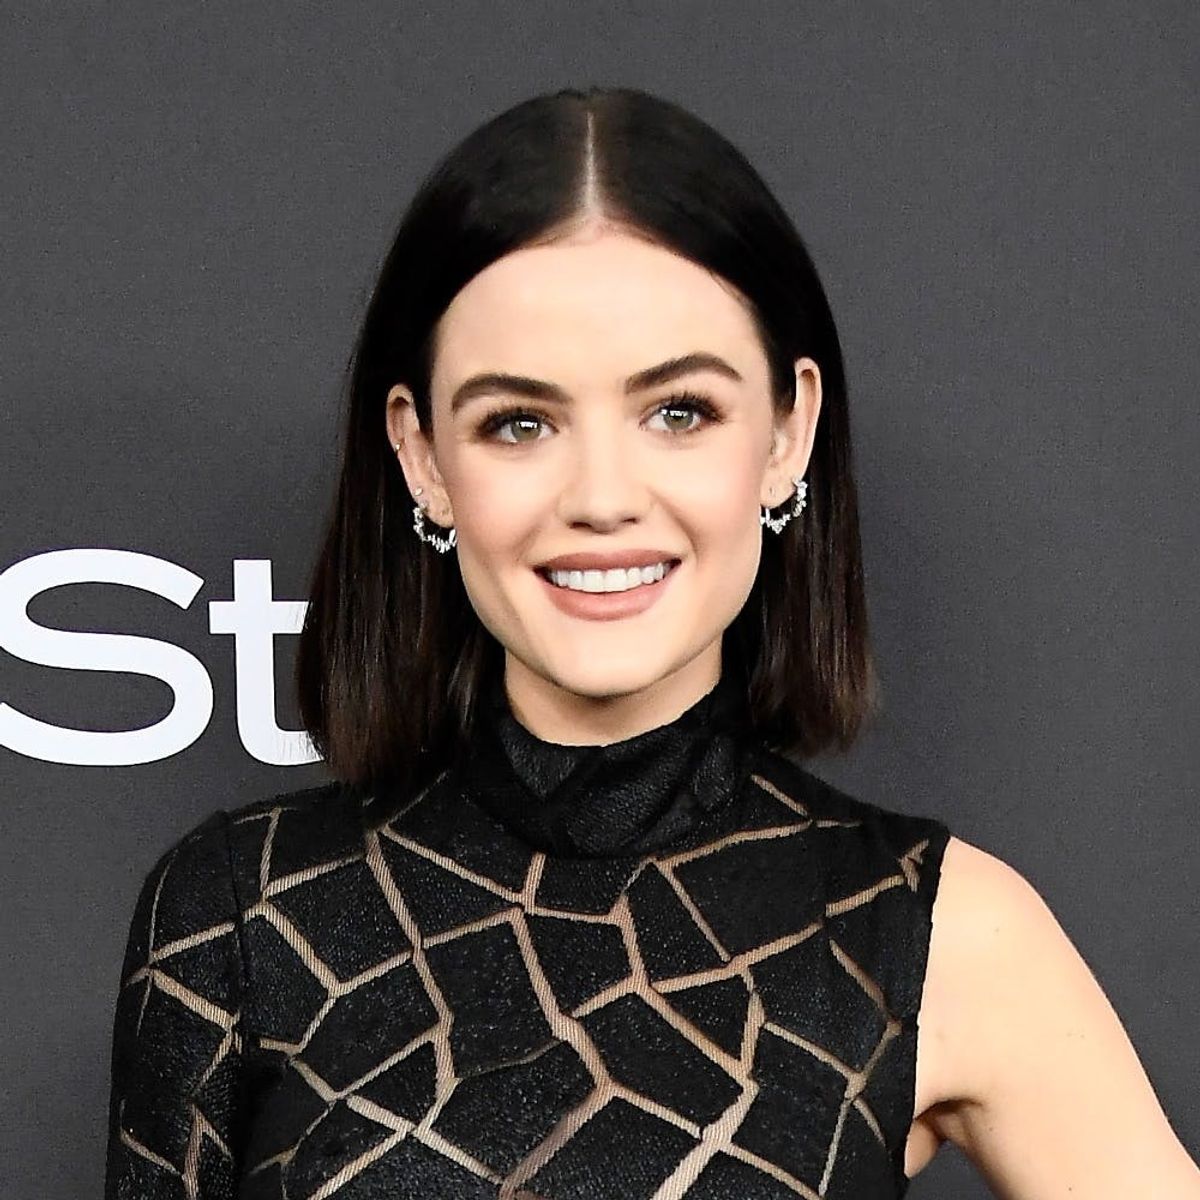 Lucy Hale Just Made a Comment About Her “Baby Hair” and Folks Aren’t Having It